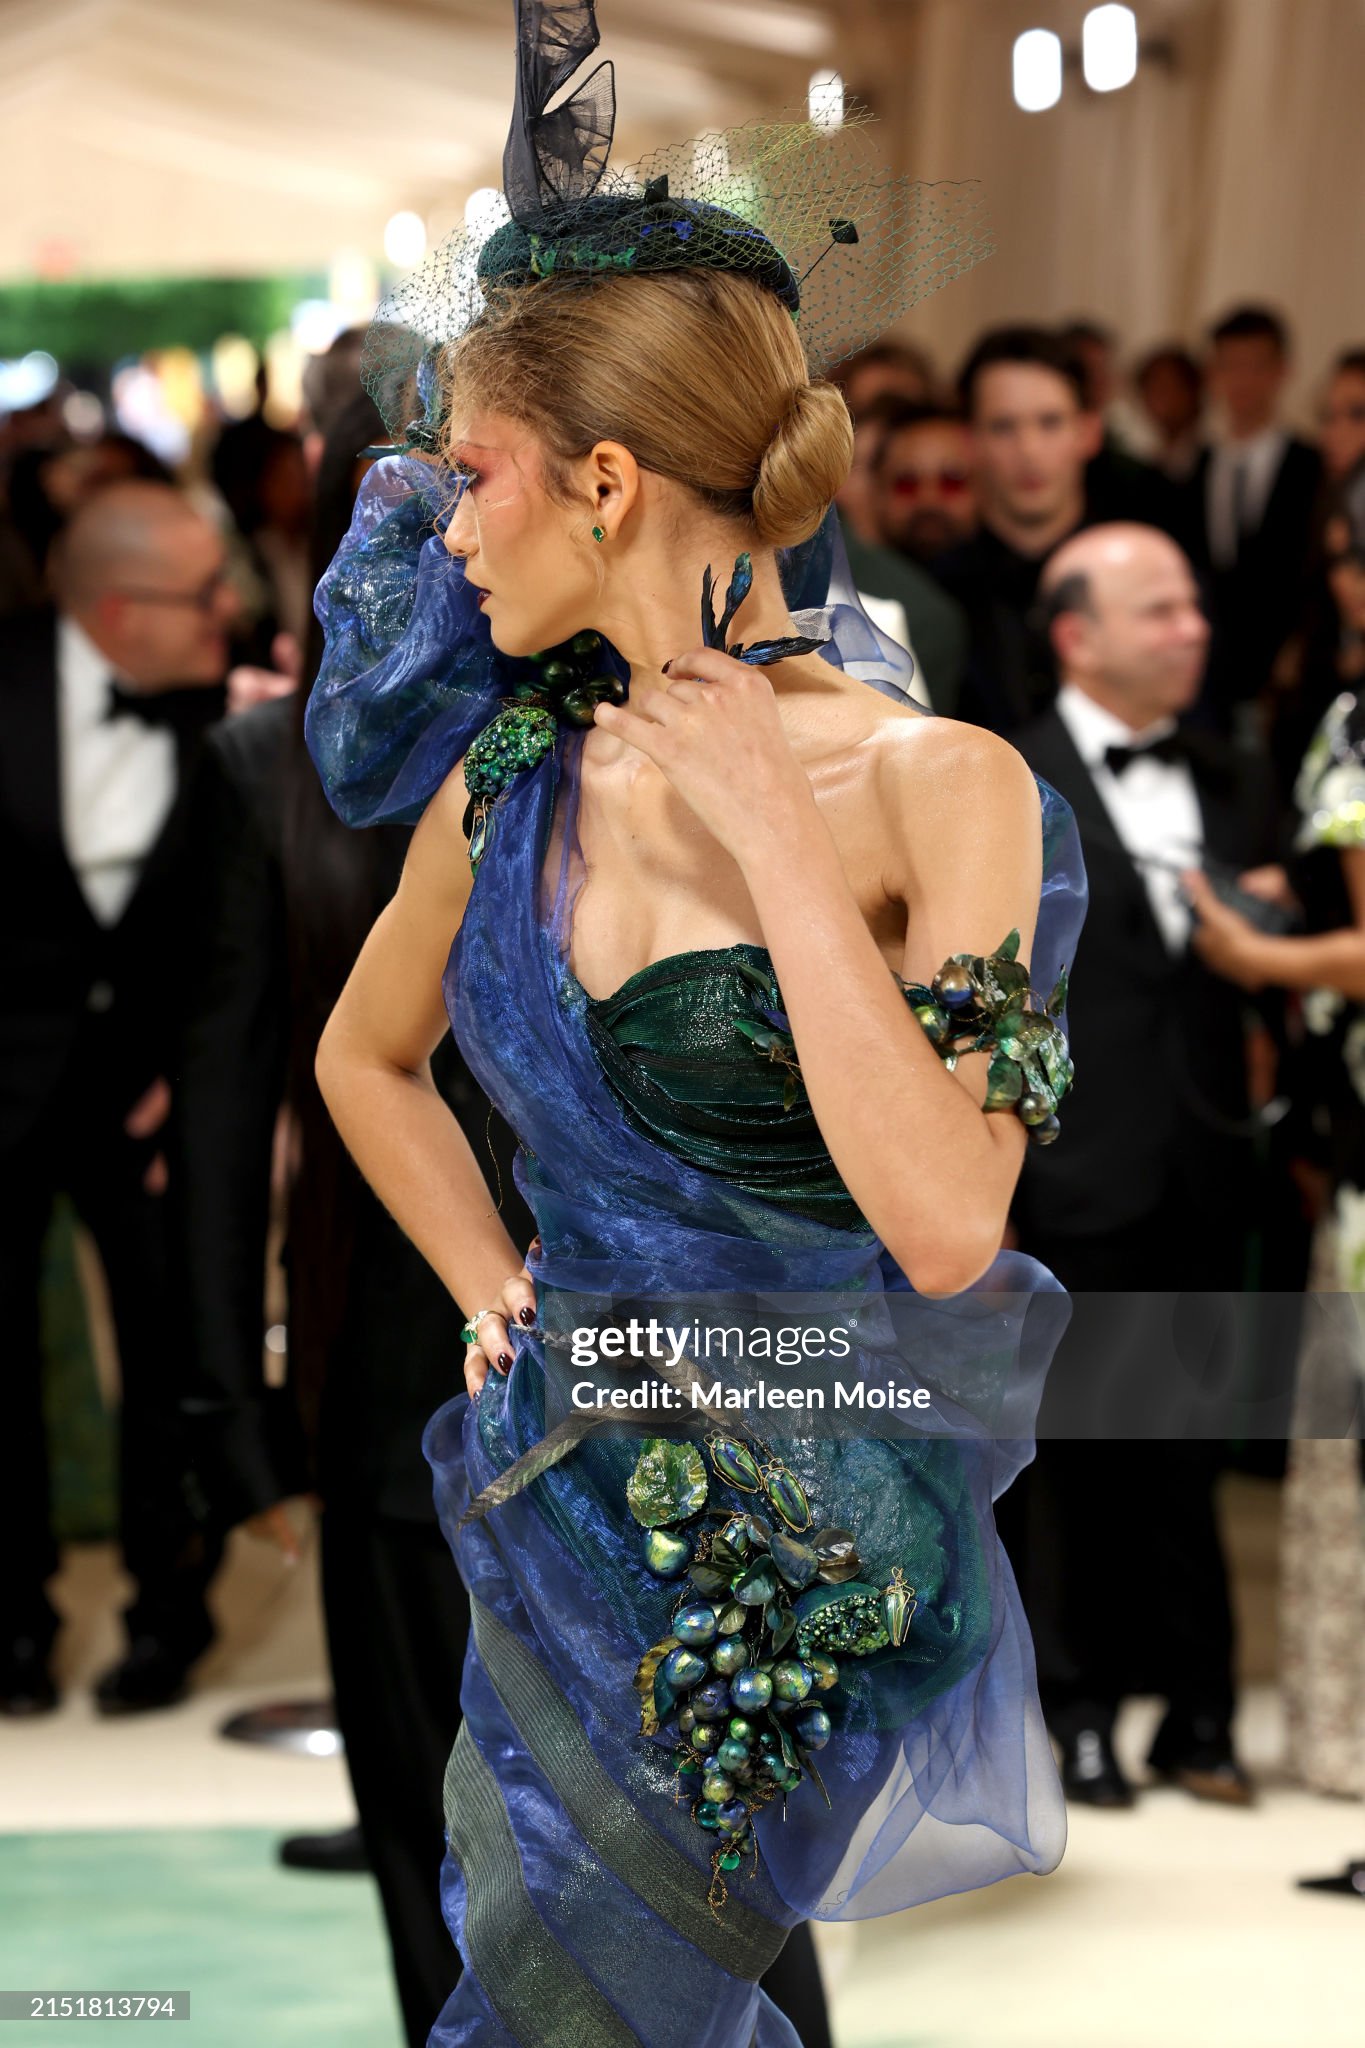 gettyimages-2151813794-2048x2048.jpg